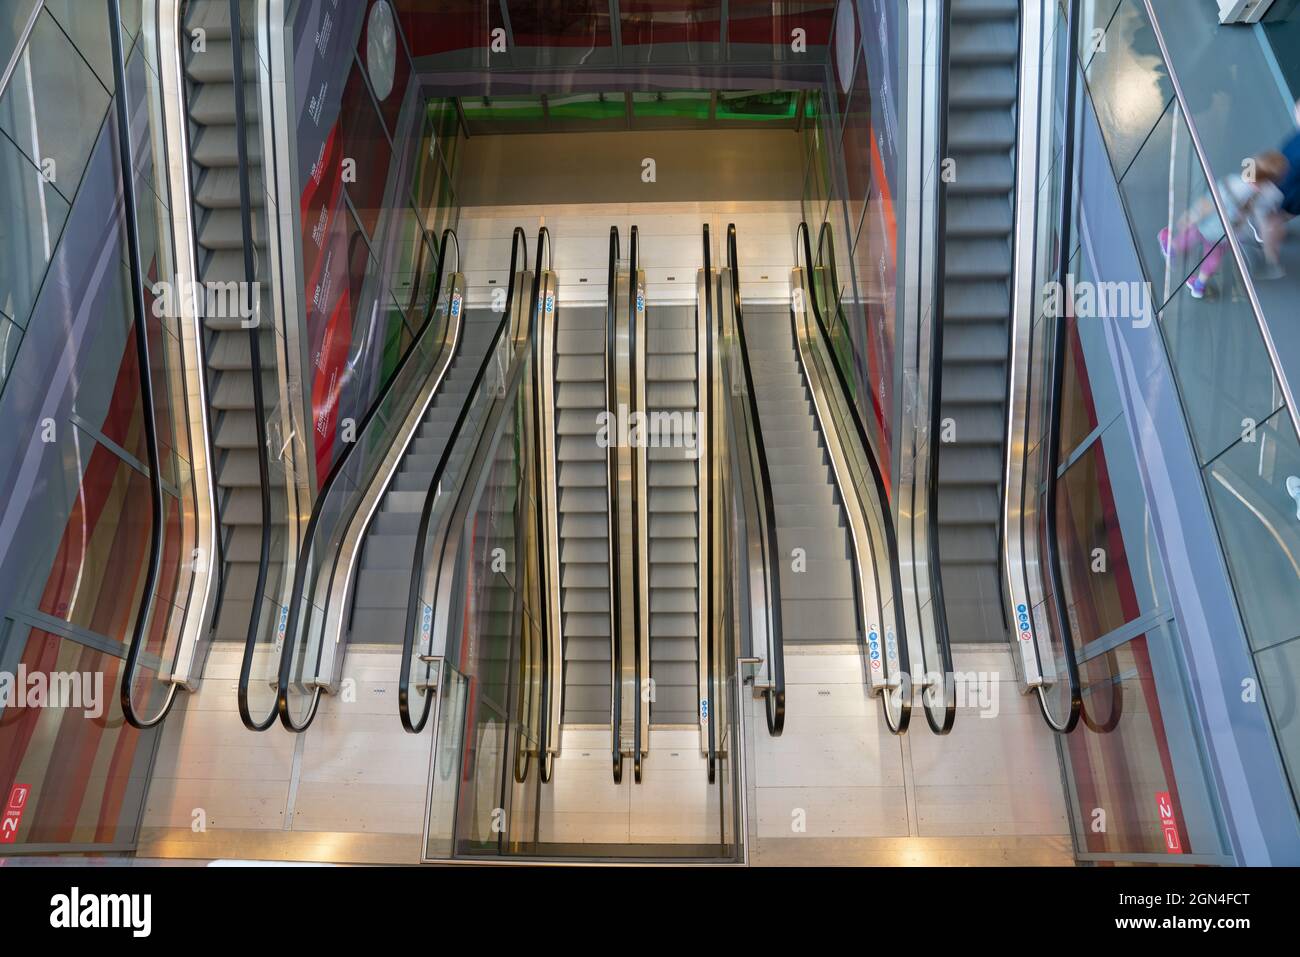 Rotterdam Netherlands- August 21 2017; Modern building interiors looking downward in escalator space. Stock Photo